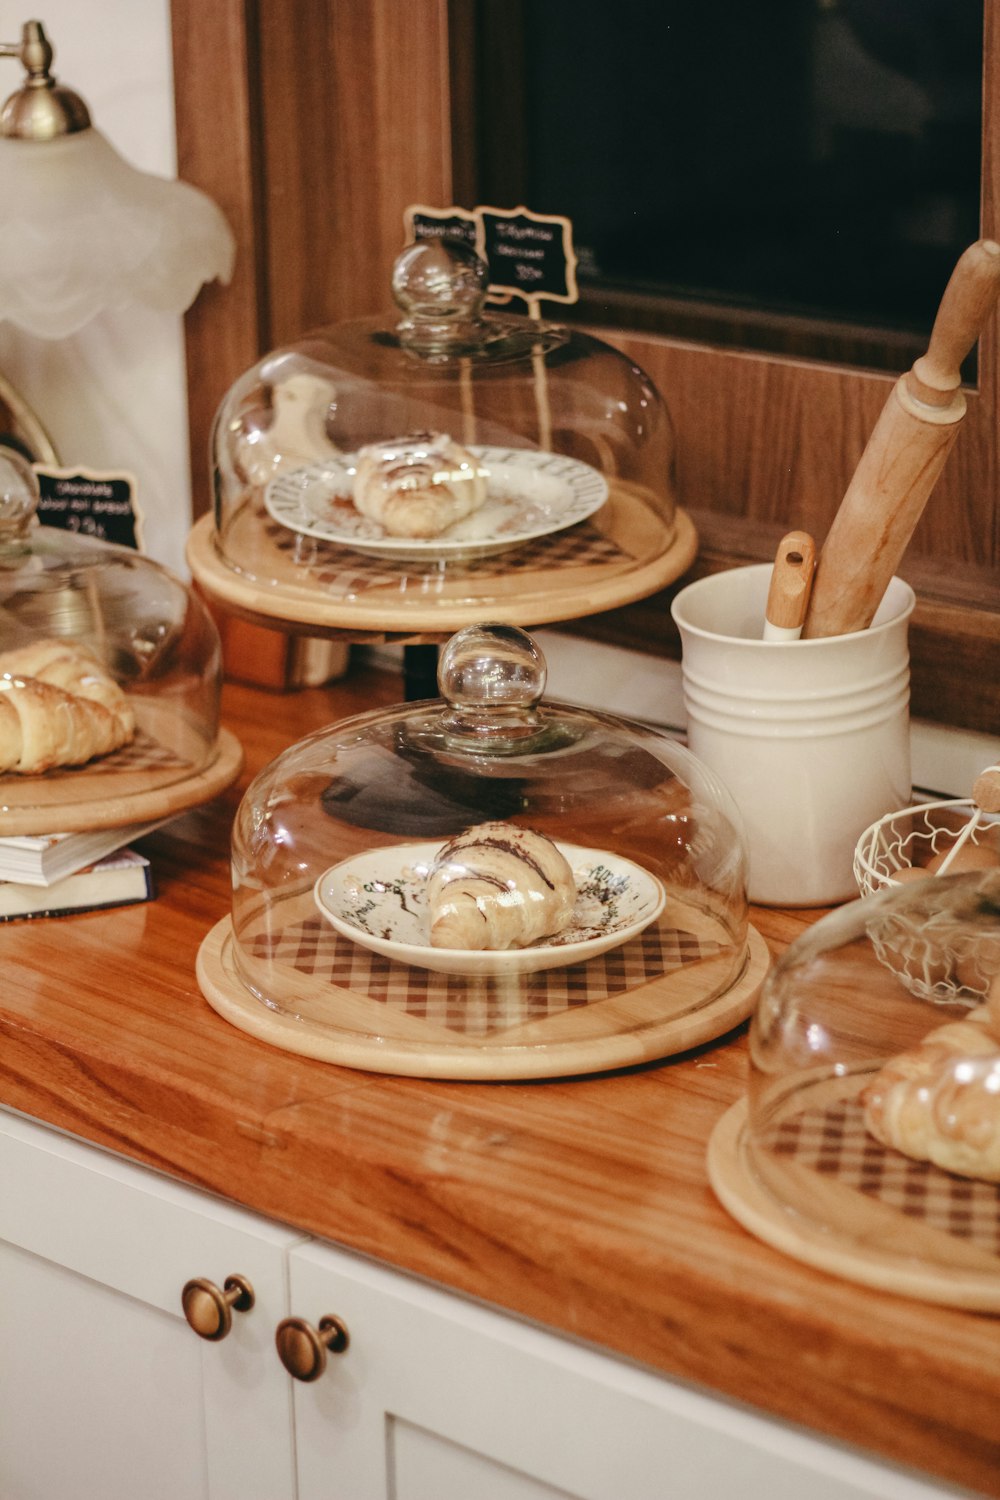 a wooden counter topped with plates and bowls filled with food